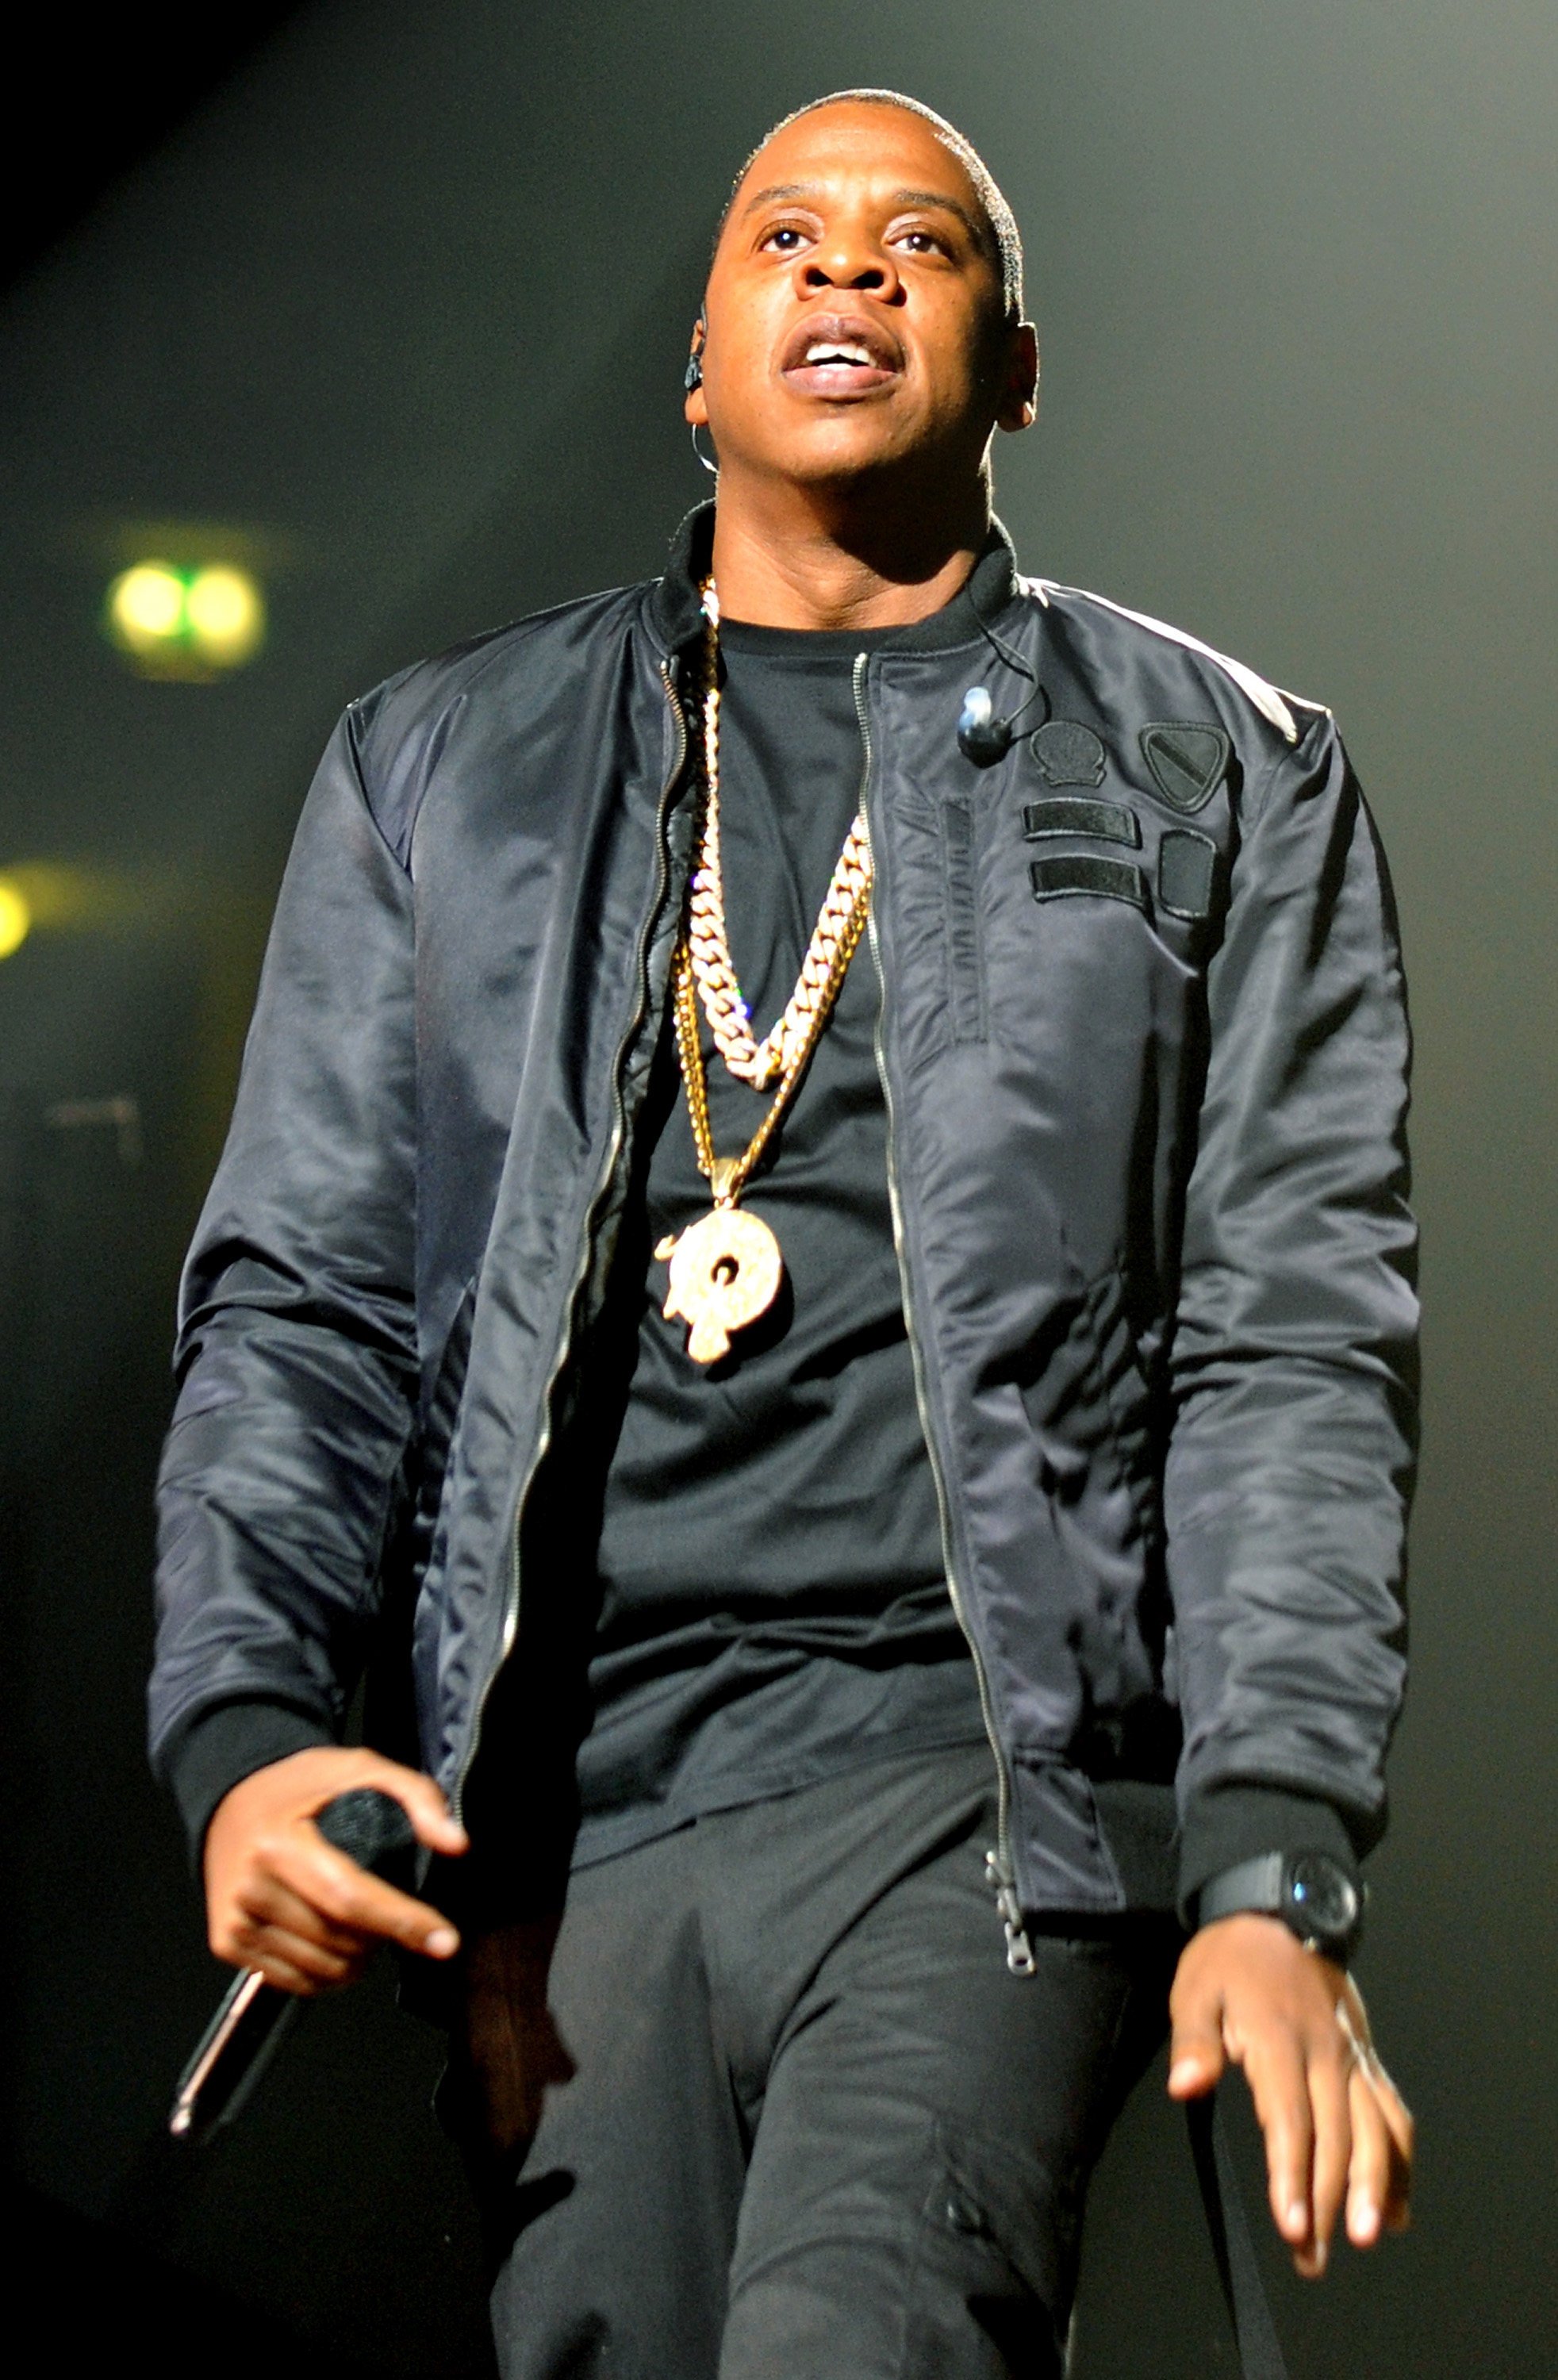 Rapper Jay-Z is just one of many hip-hop artists to embrace heavy gold jewellery, the latest in a long line of elites over the ages to do so. Photo: Redferns via Getty Images